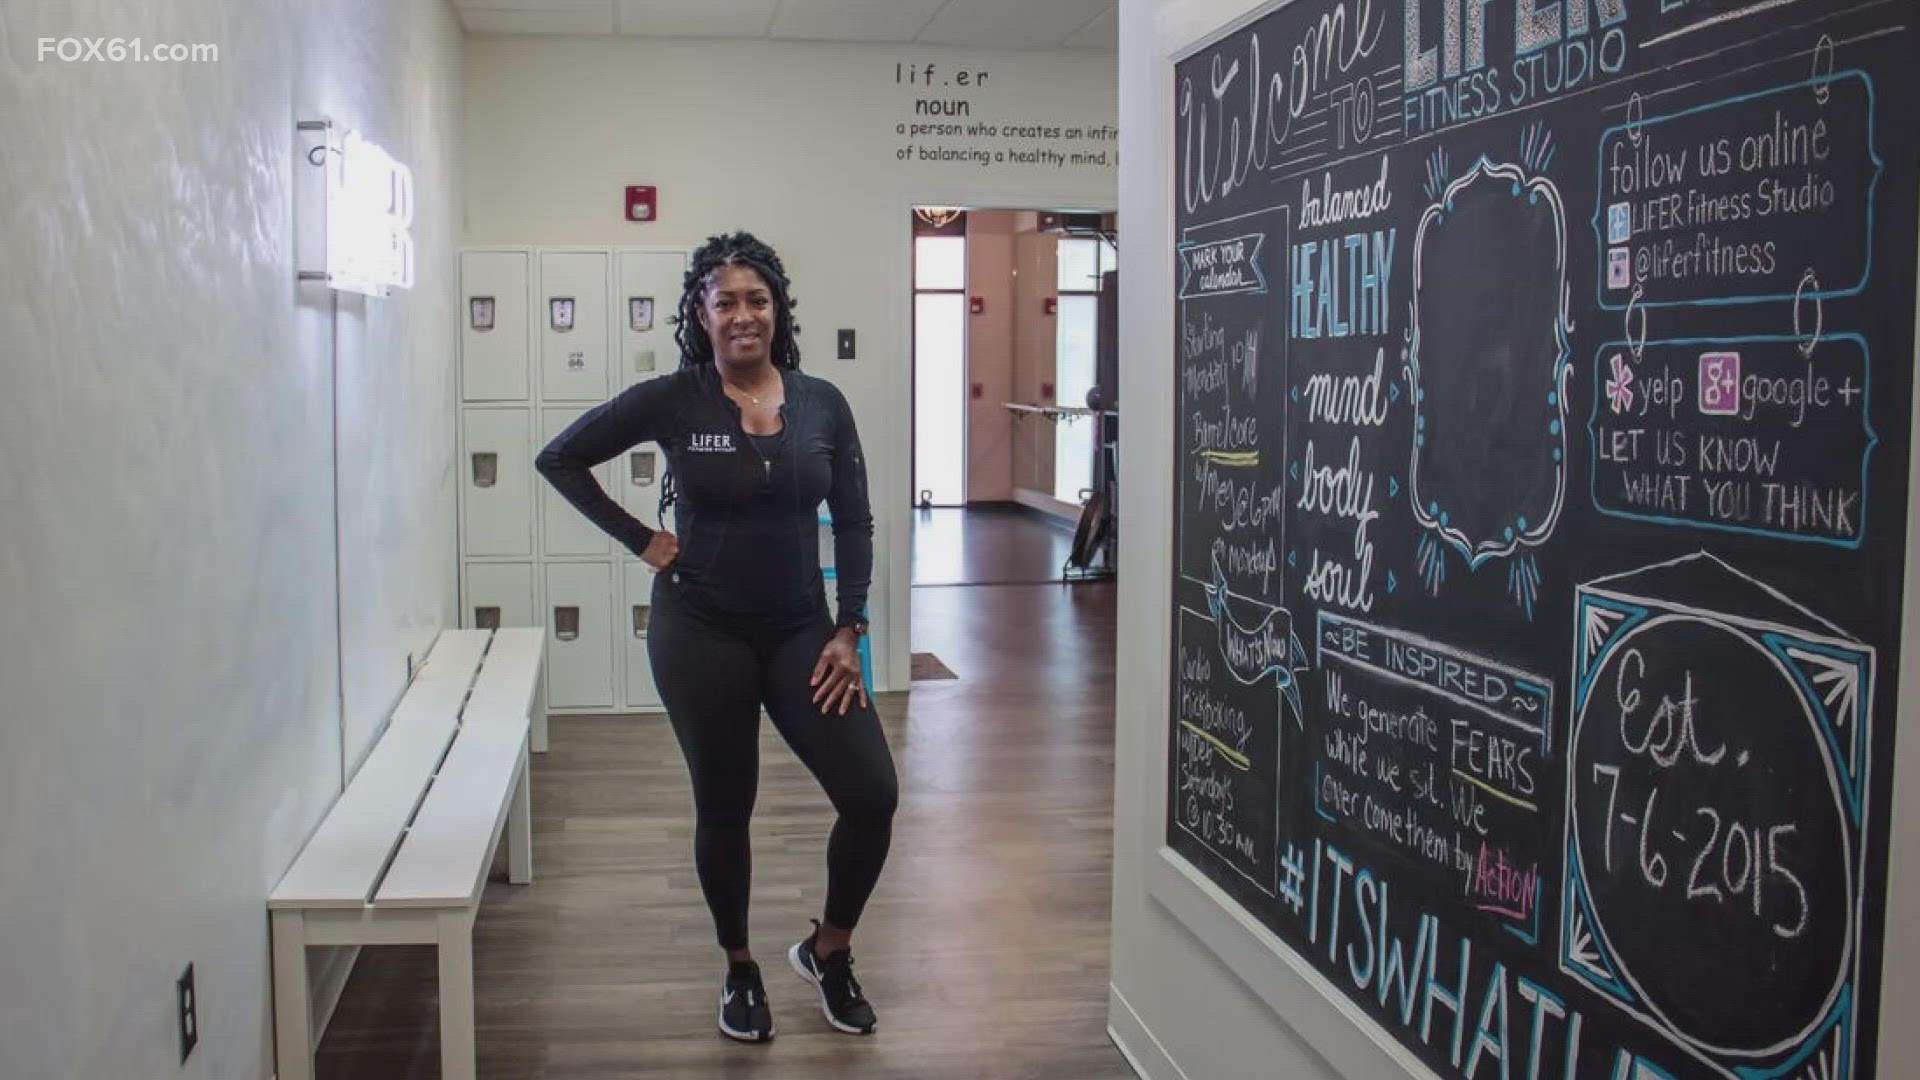 Deborah Fountain, owner of Lifer Fitness in West Hartford, shares how she started her business to share her passion for fitness.